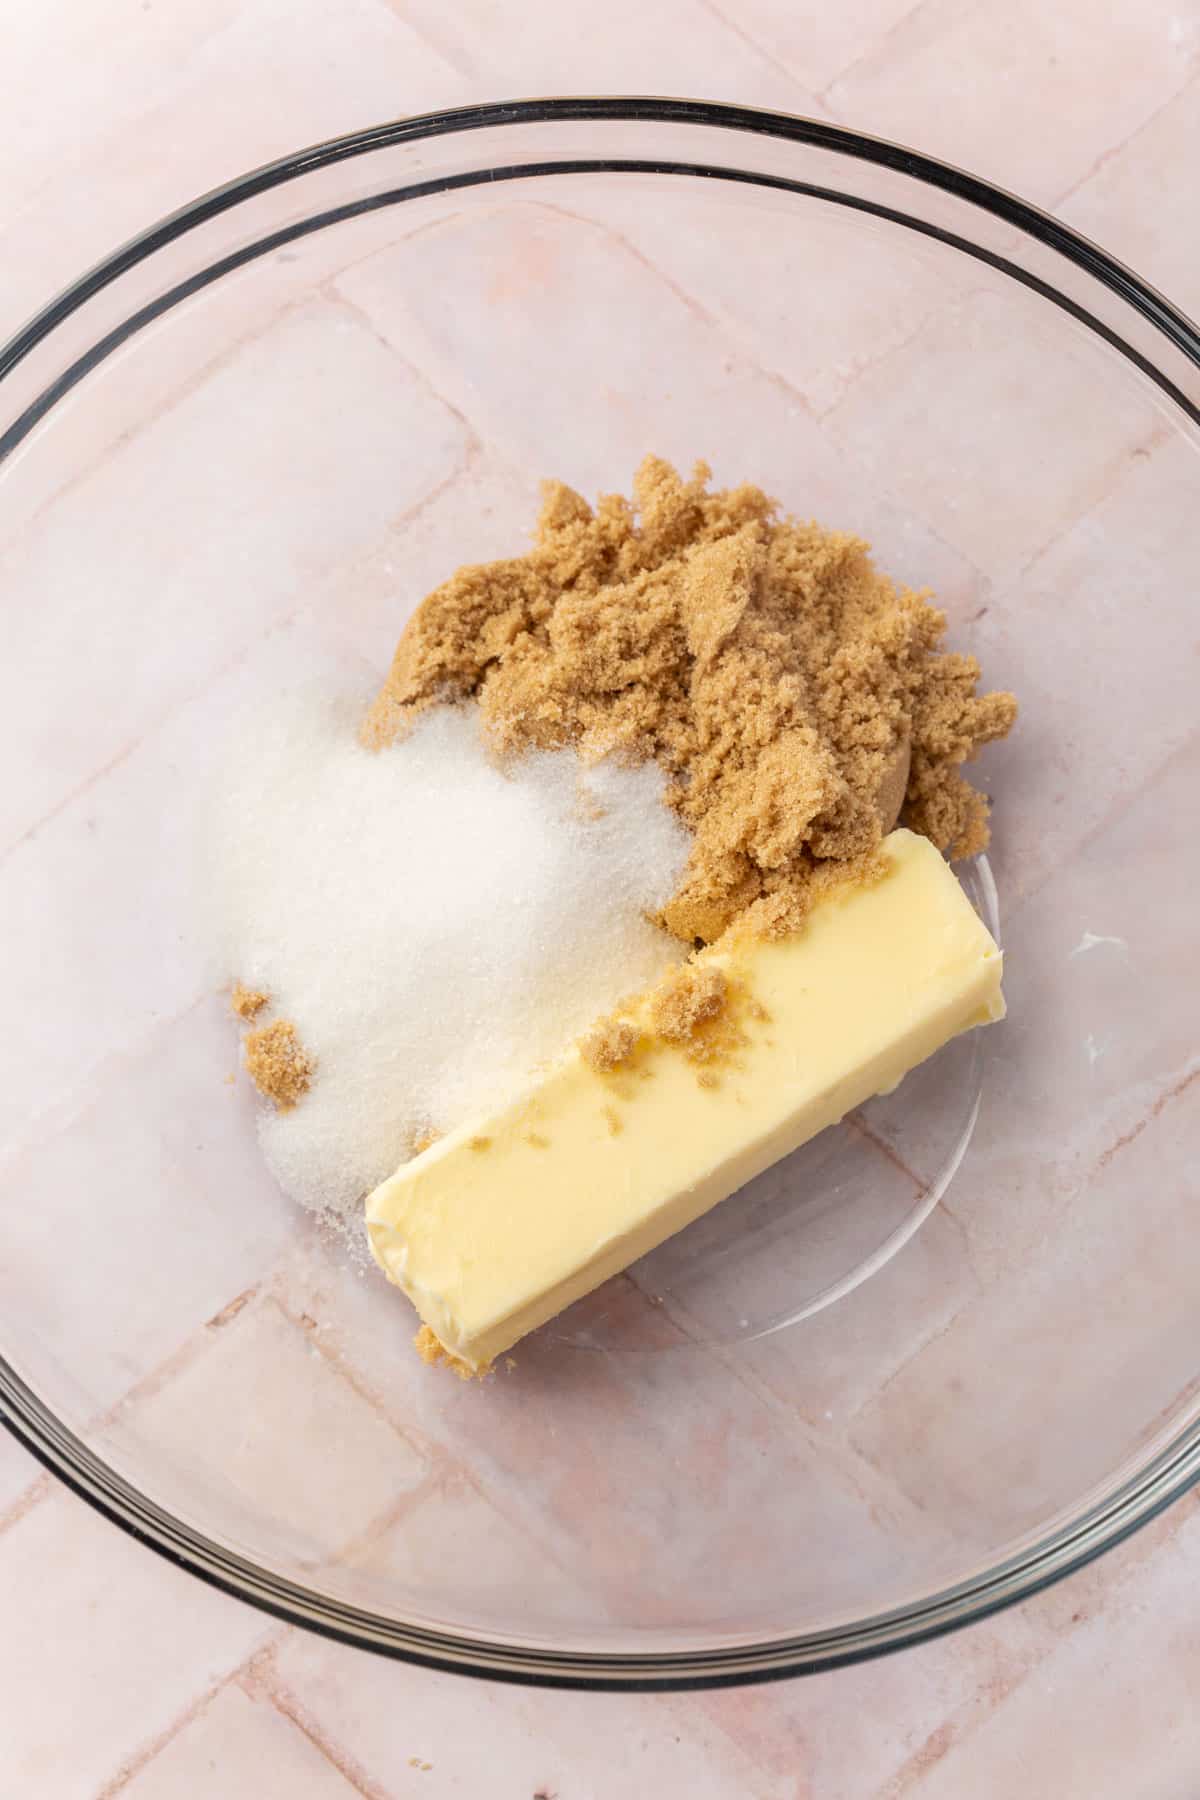 A glass mixing bowl with a stick of butter, brown sugar, and granulated sugar.